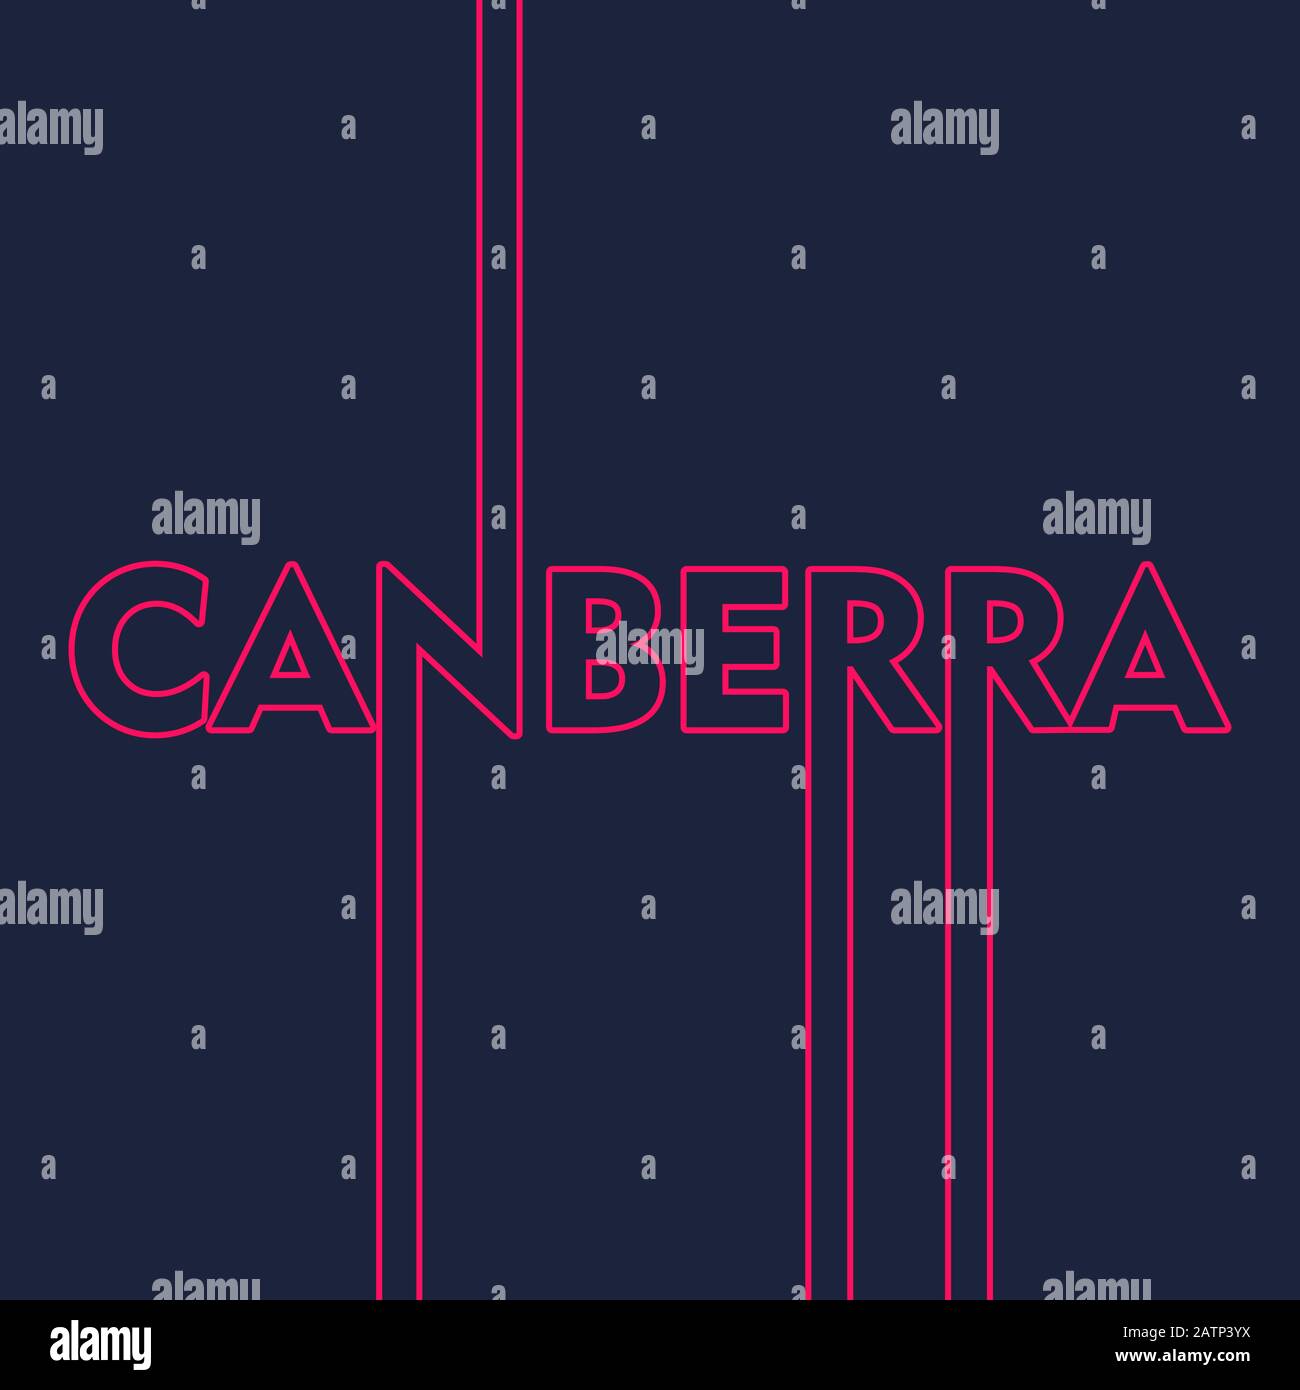 Canberra city name. Stock Vector